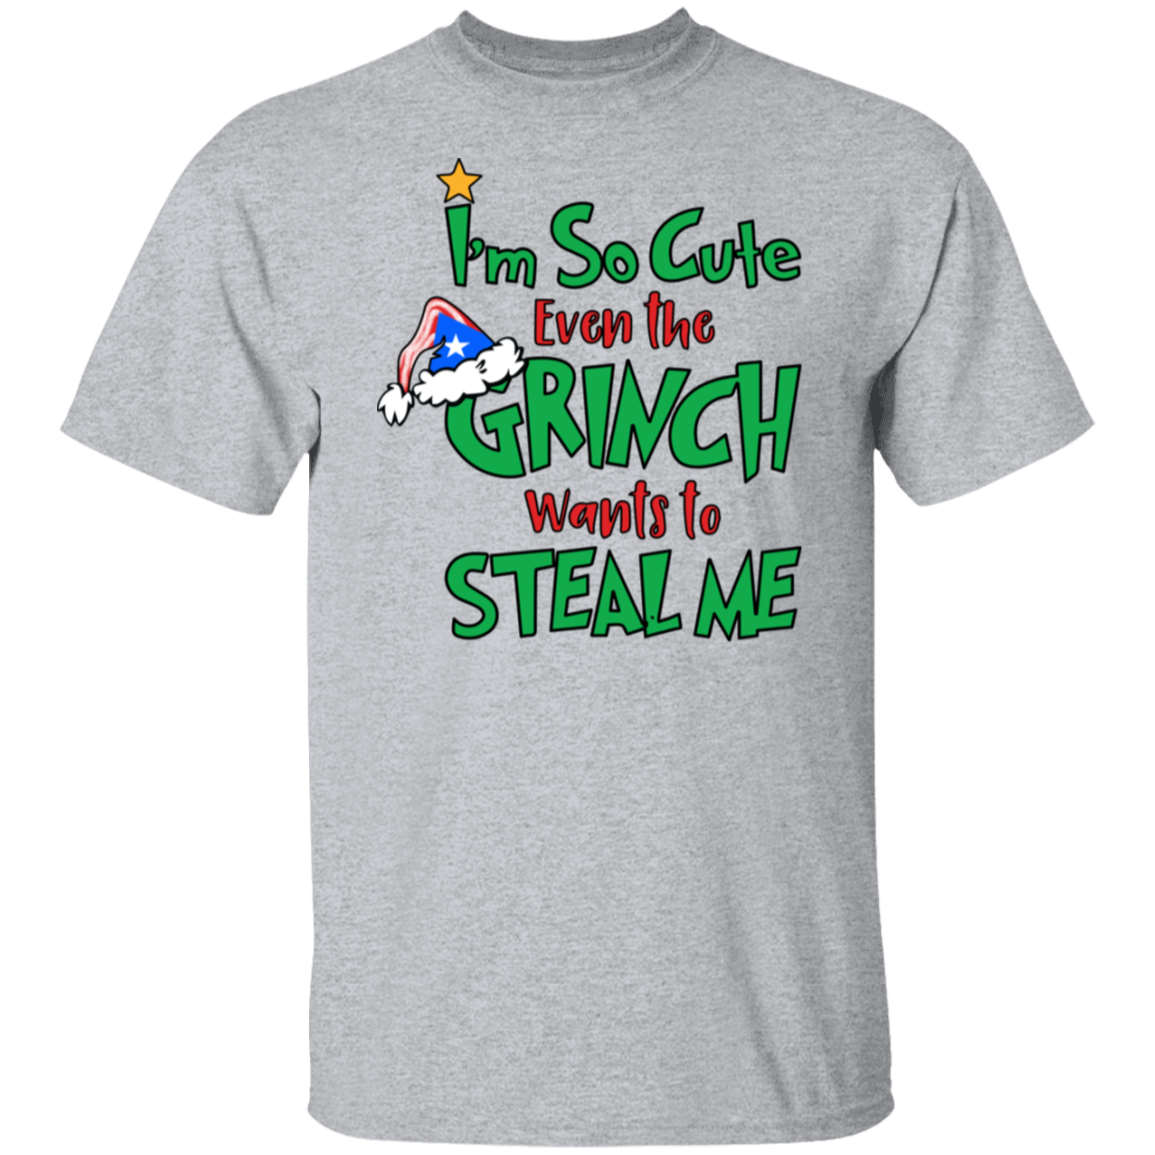 I'm So Cute The Grinch Wants to Steal Me T-Shirt